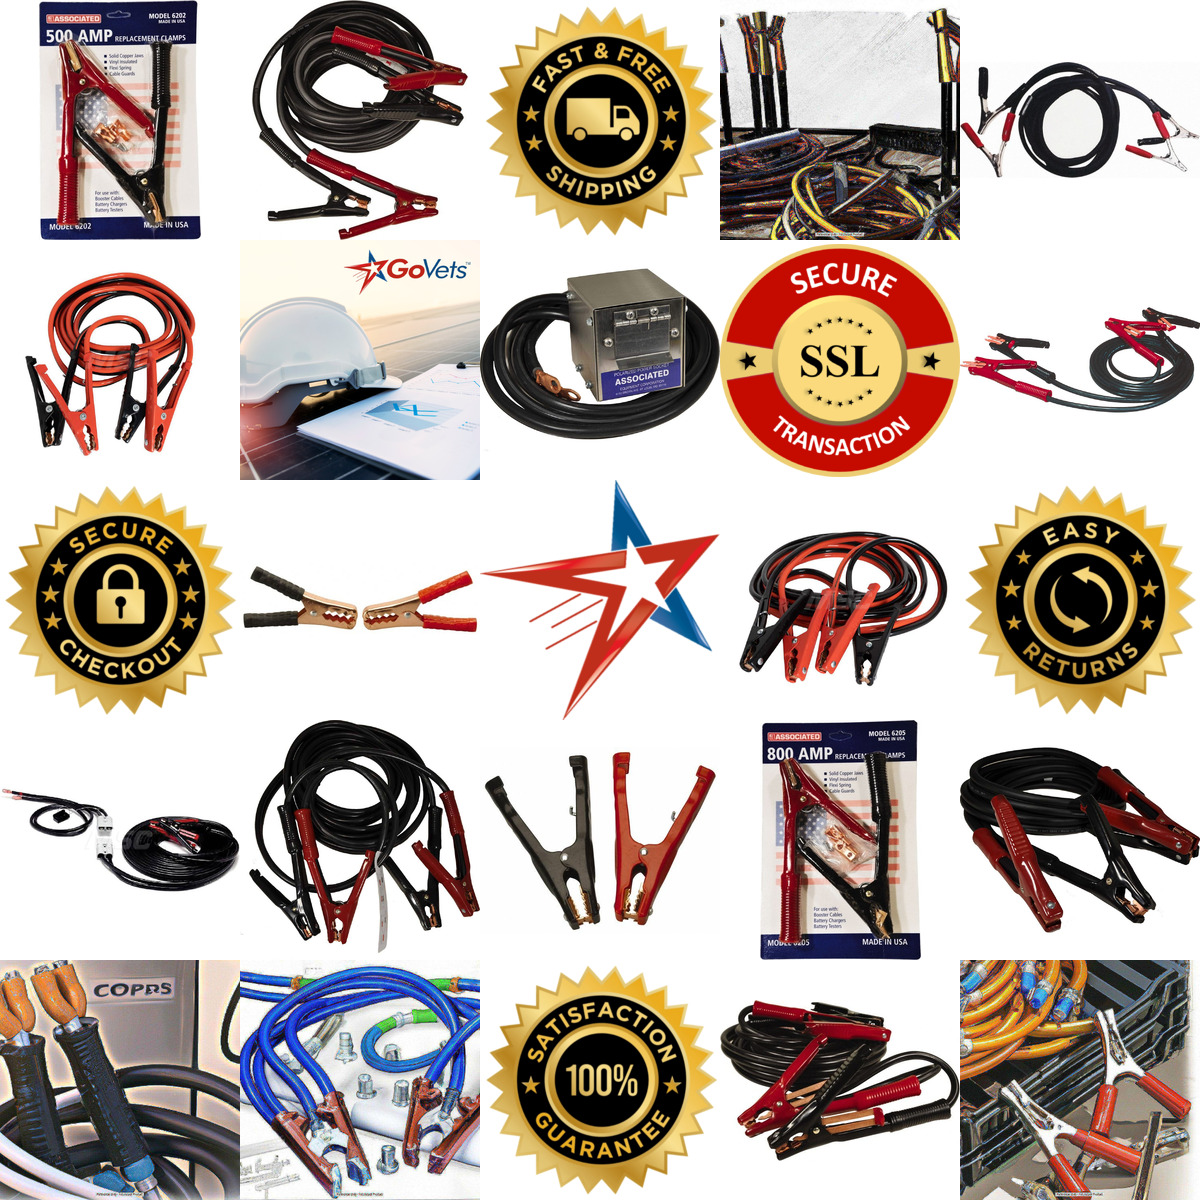 A selection of Booster Cables and Clamps products on GoVets